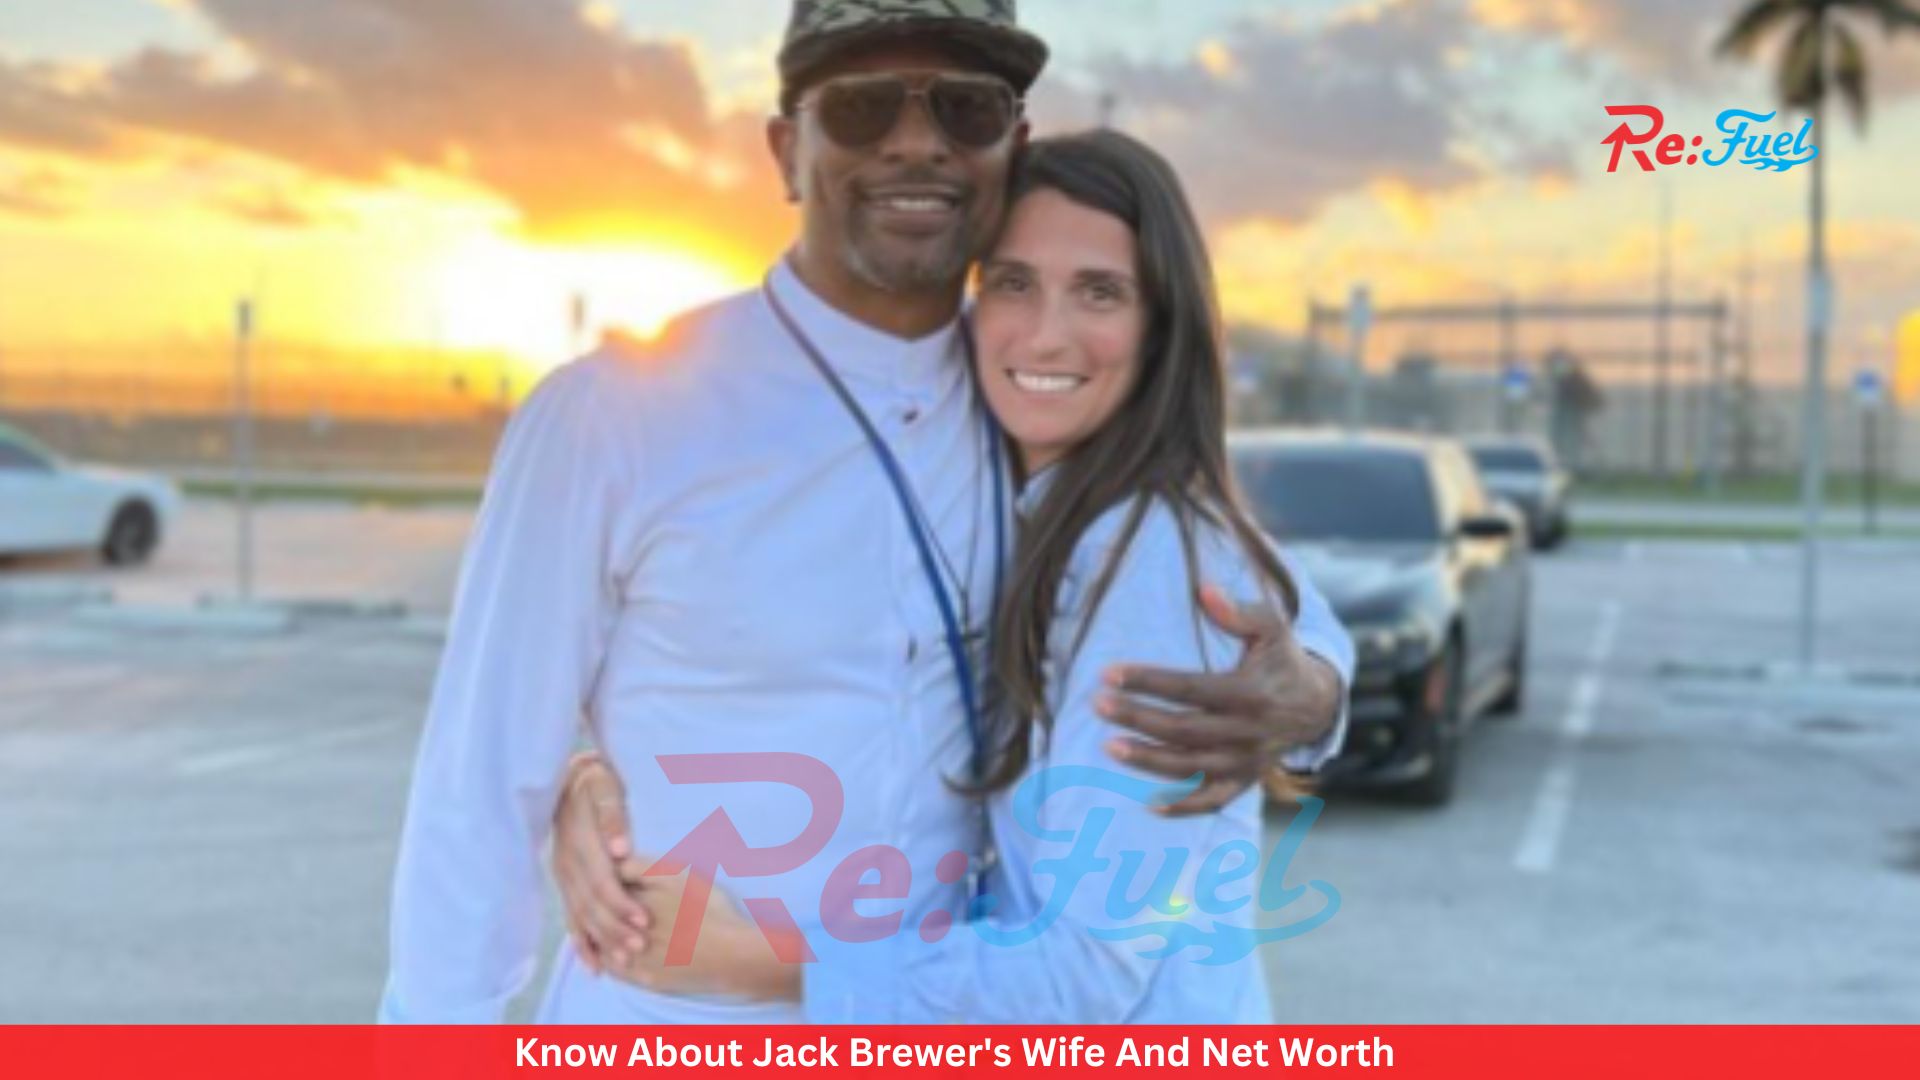 Know About Jack Brewer's Wife And Net Worth